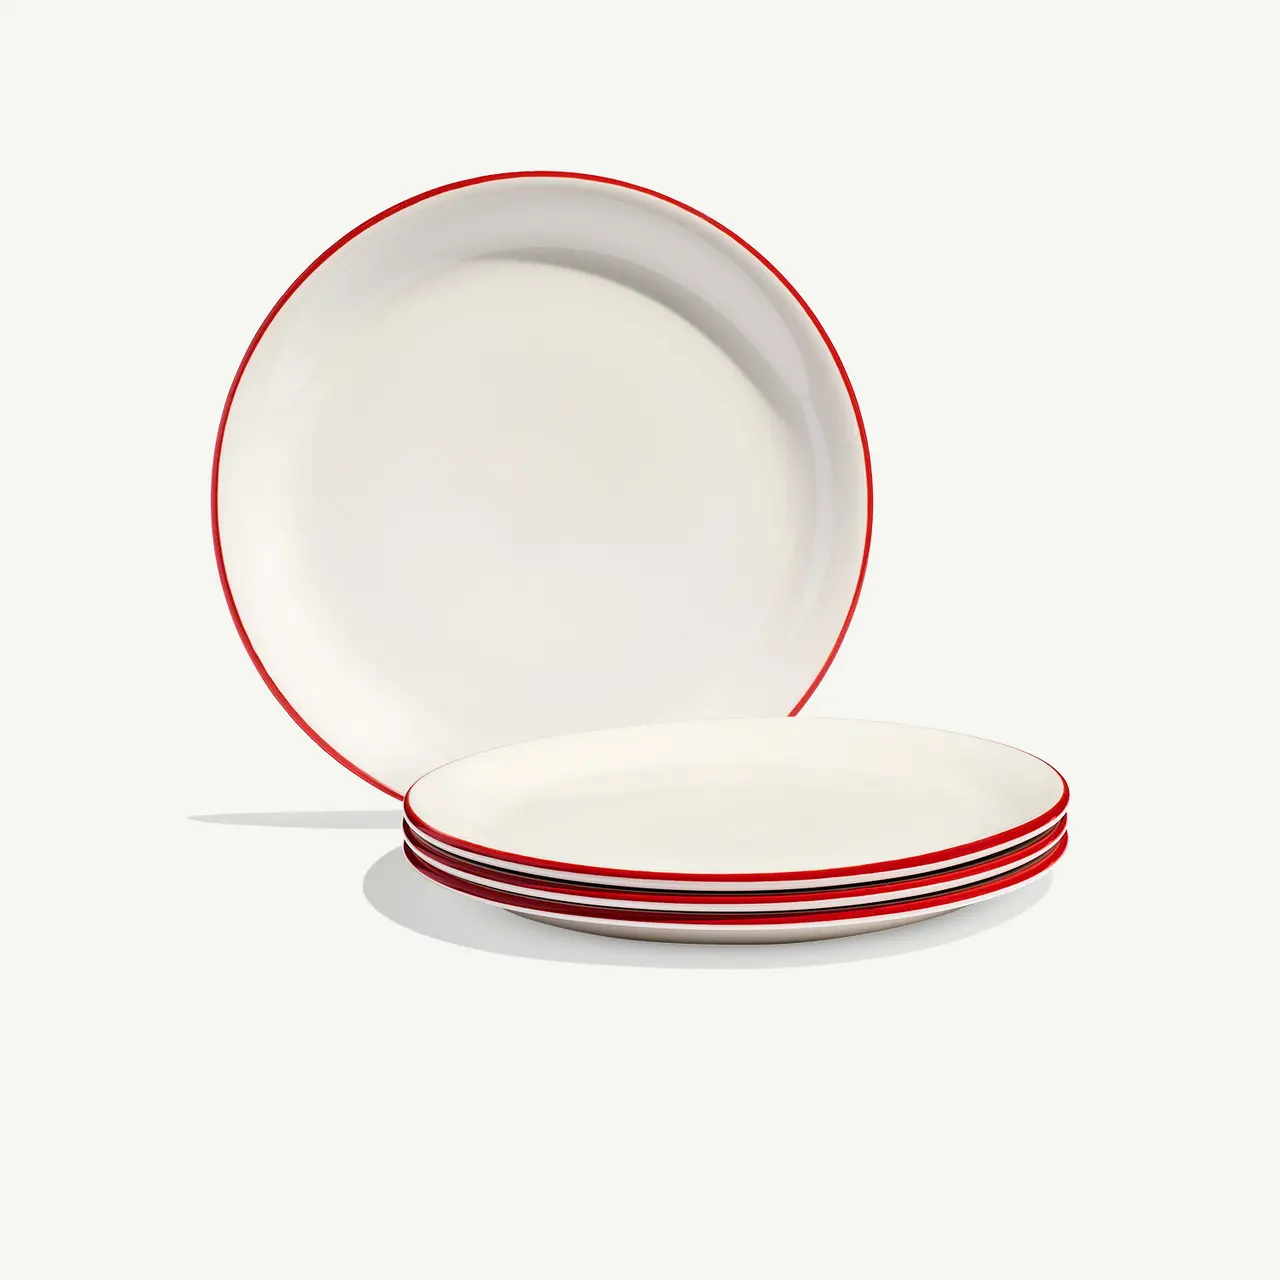 A stack of white plates with red trim sits beside a single plate propped up on its edge against a light background.